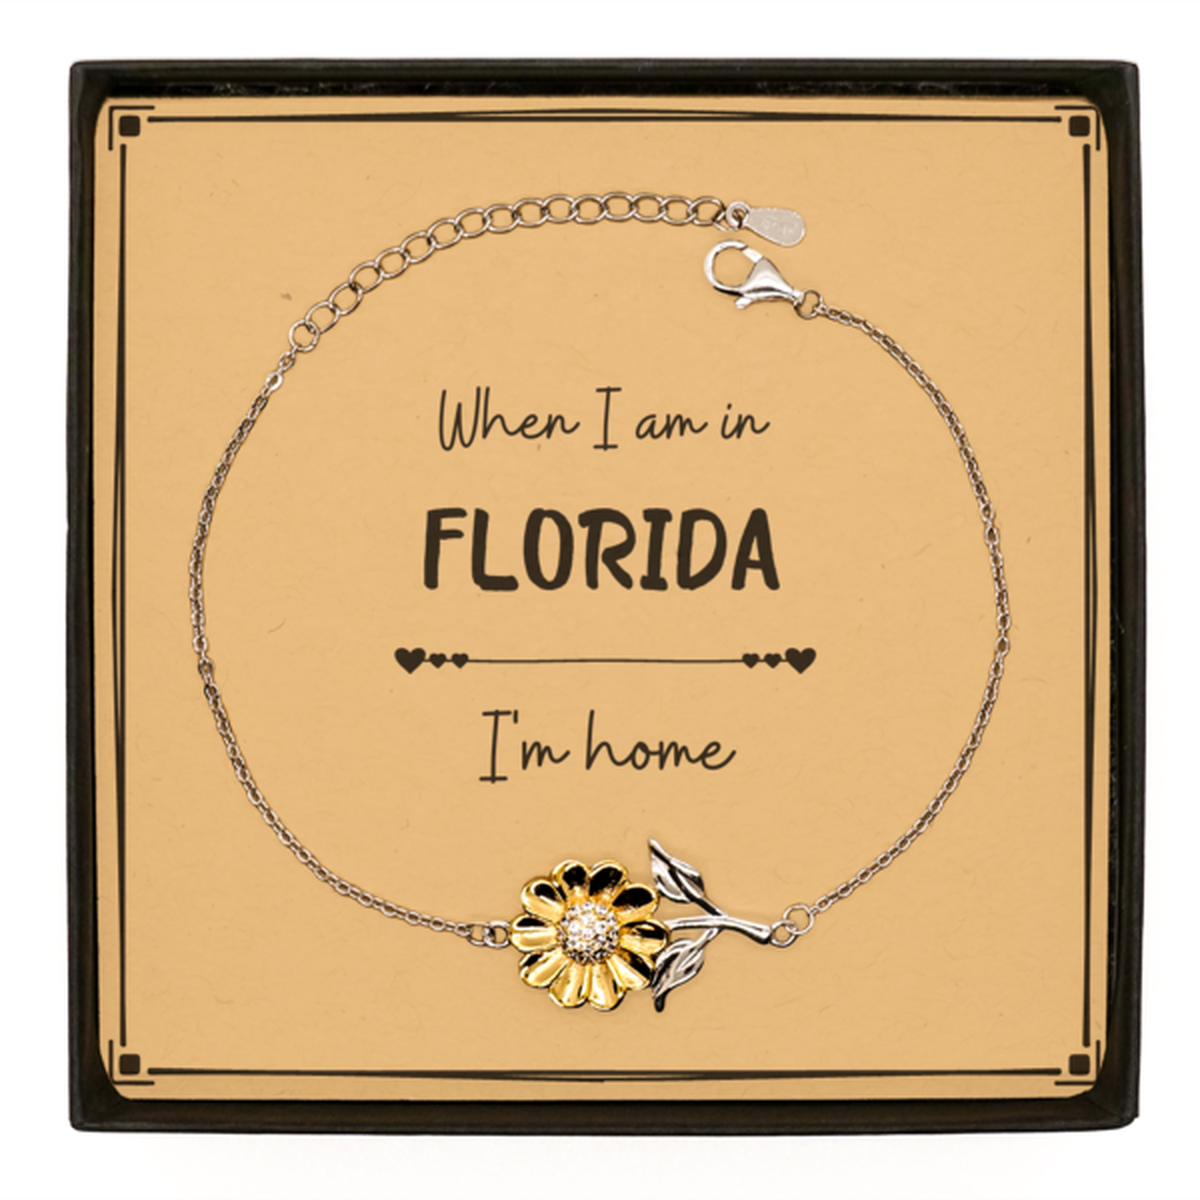 When I am in Florida I'm home Sunflower Bracelet, Message Card Gifts For Florida, State Florida Birthday Gifts for Friends Coworker